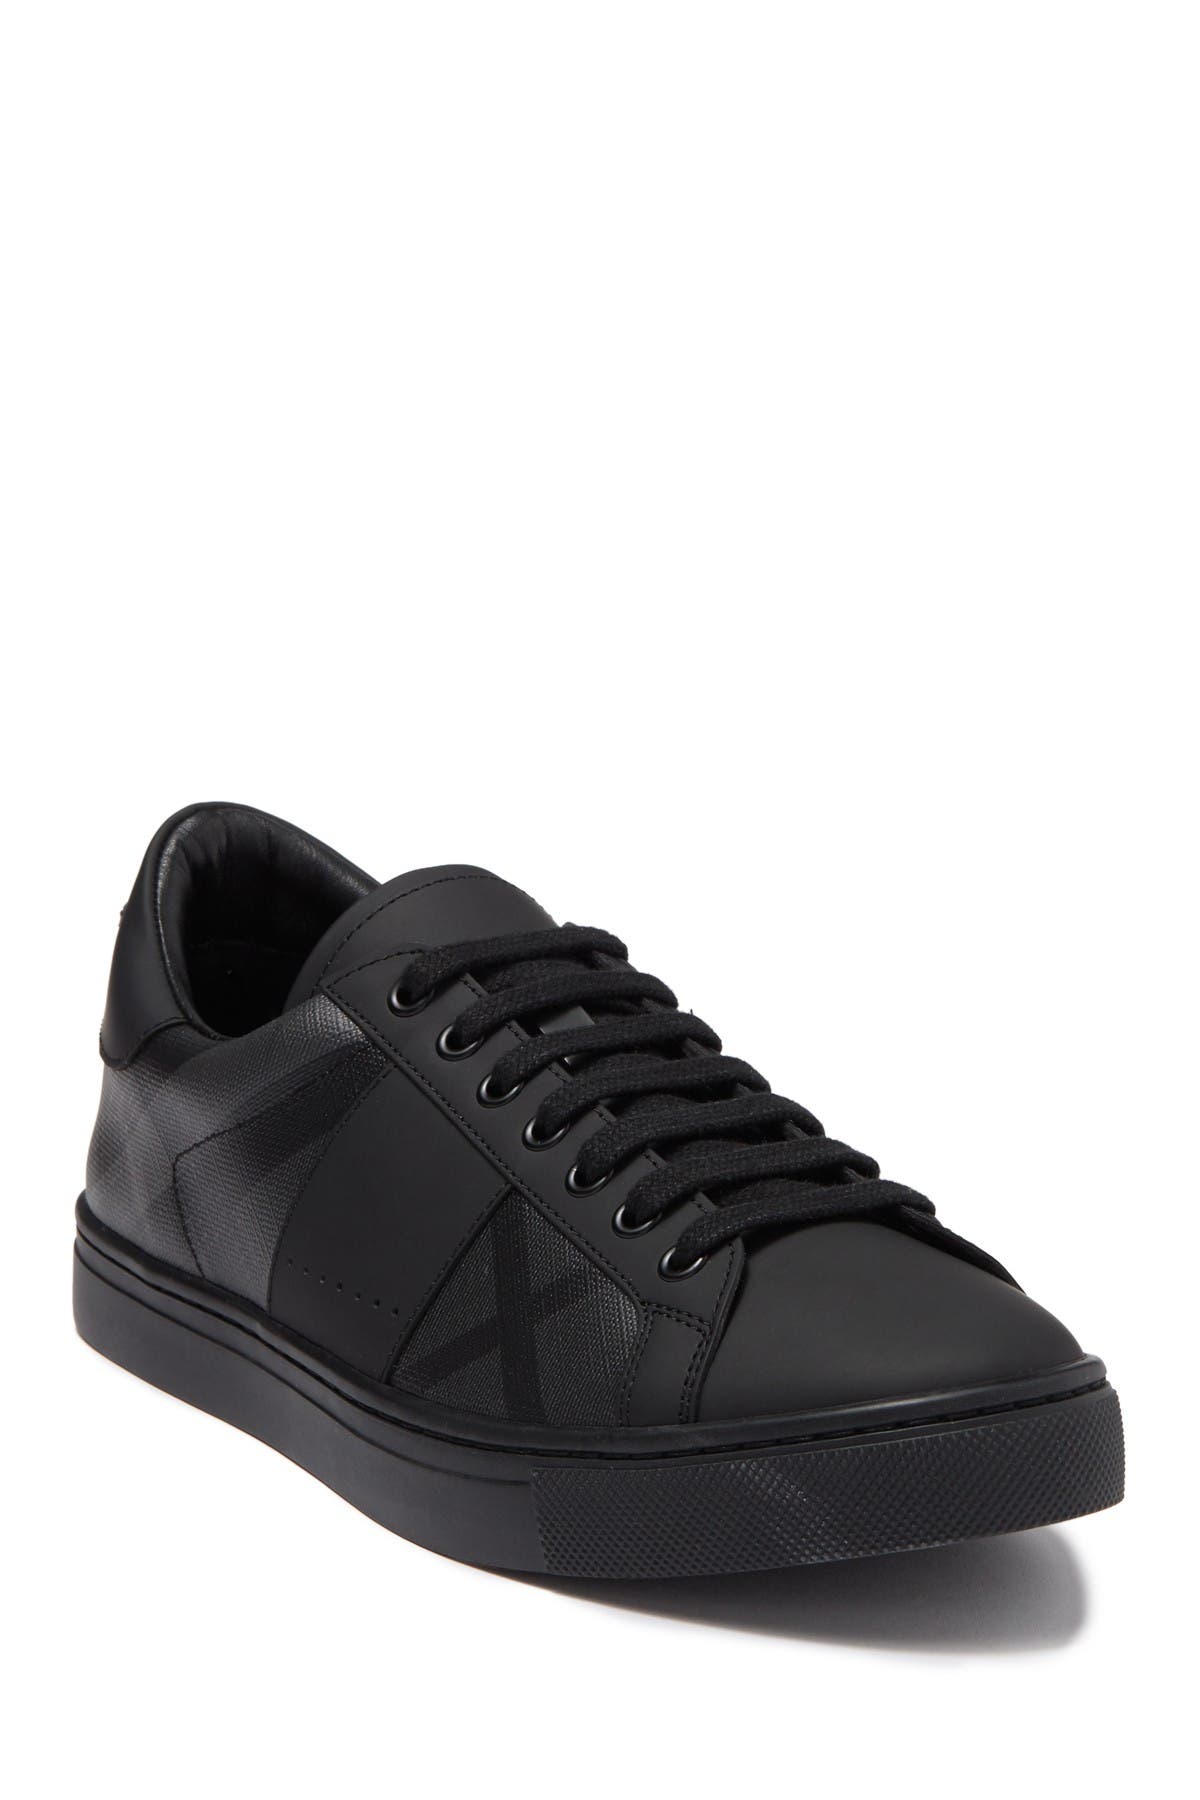 Burberry | Ritson Leather Sneaker 